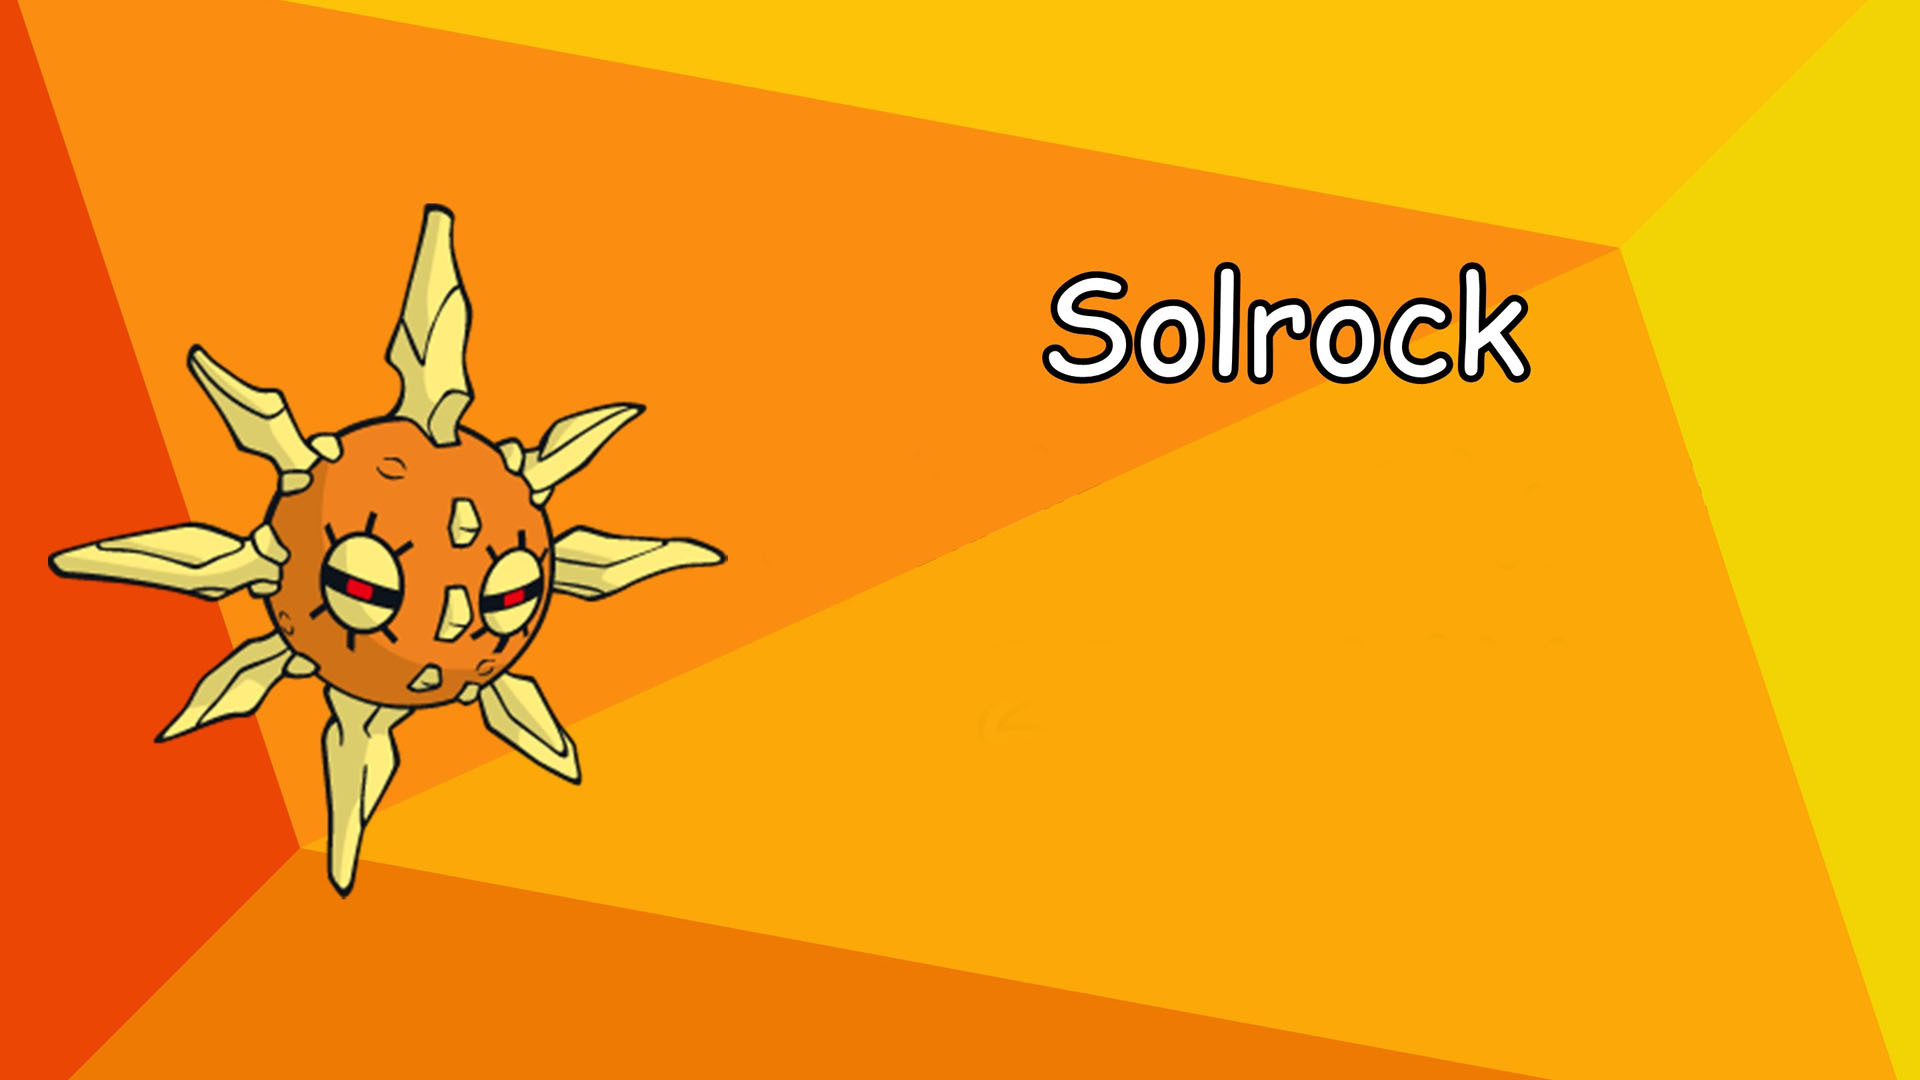 Solrock Wallpaper Image Photos Pictures Background